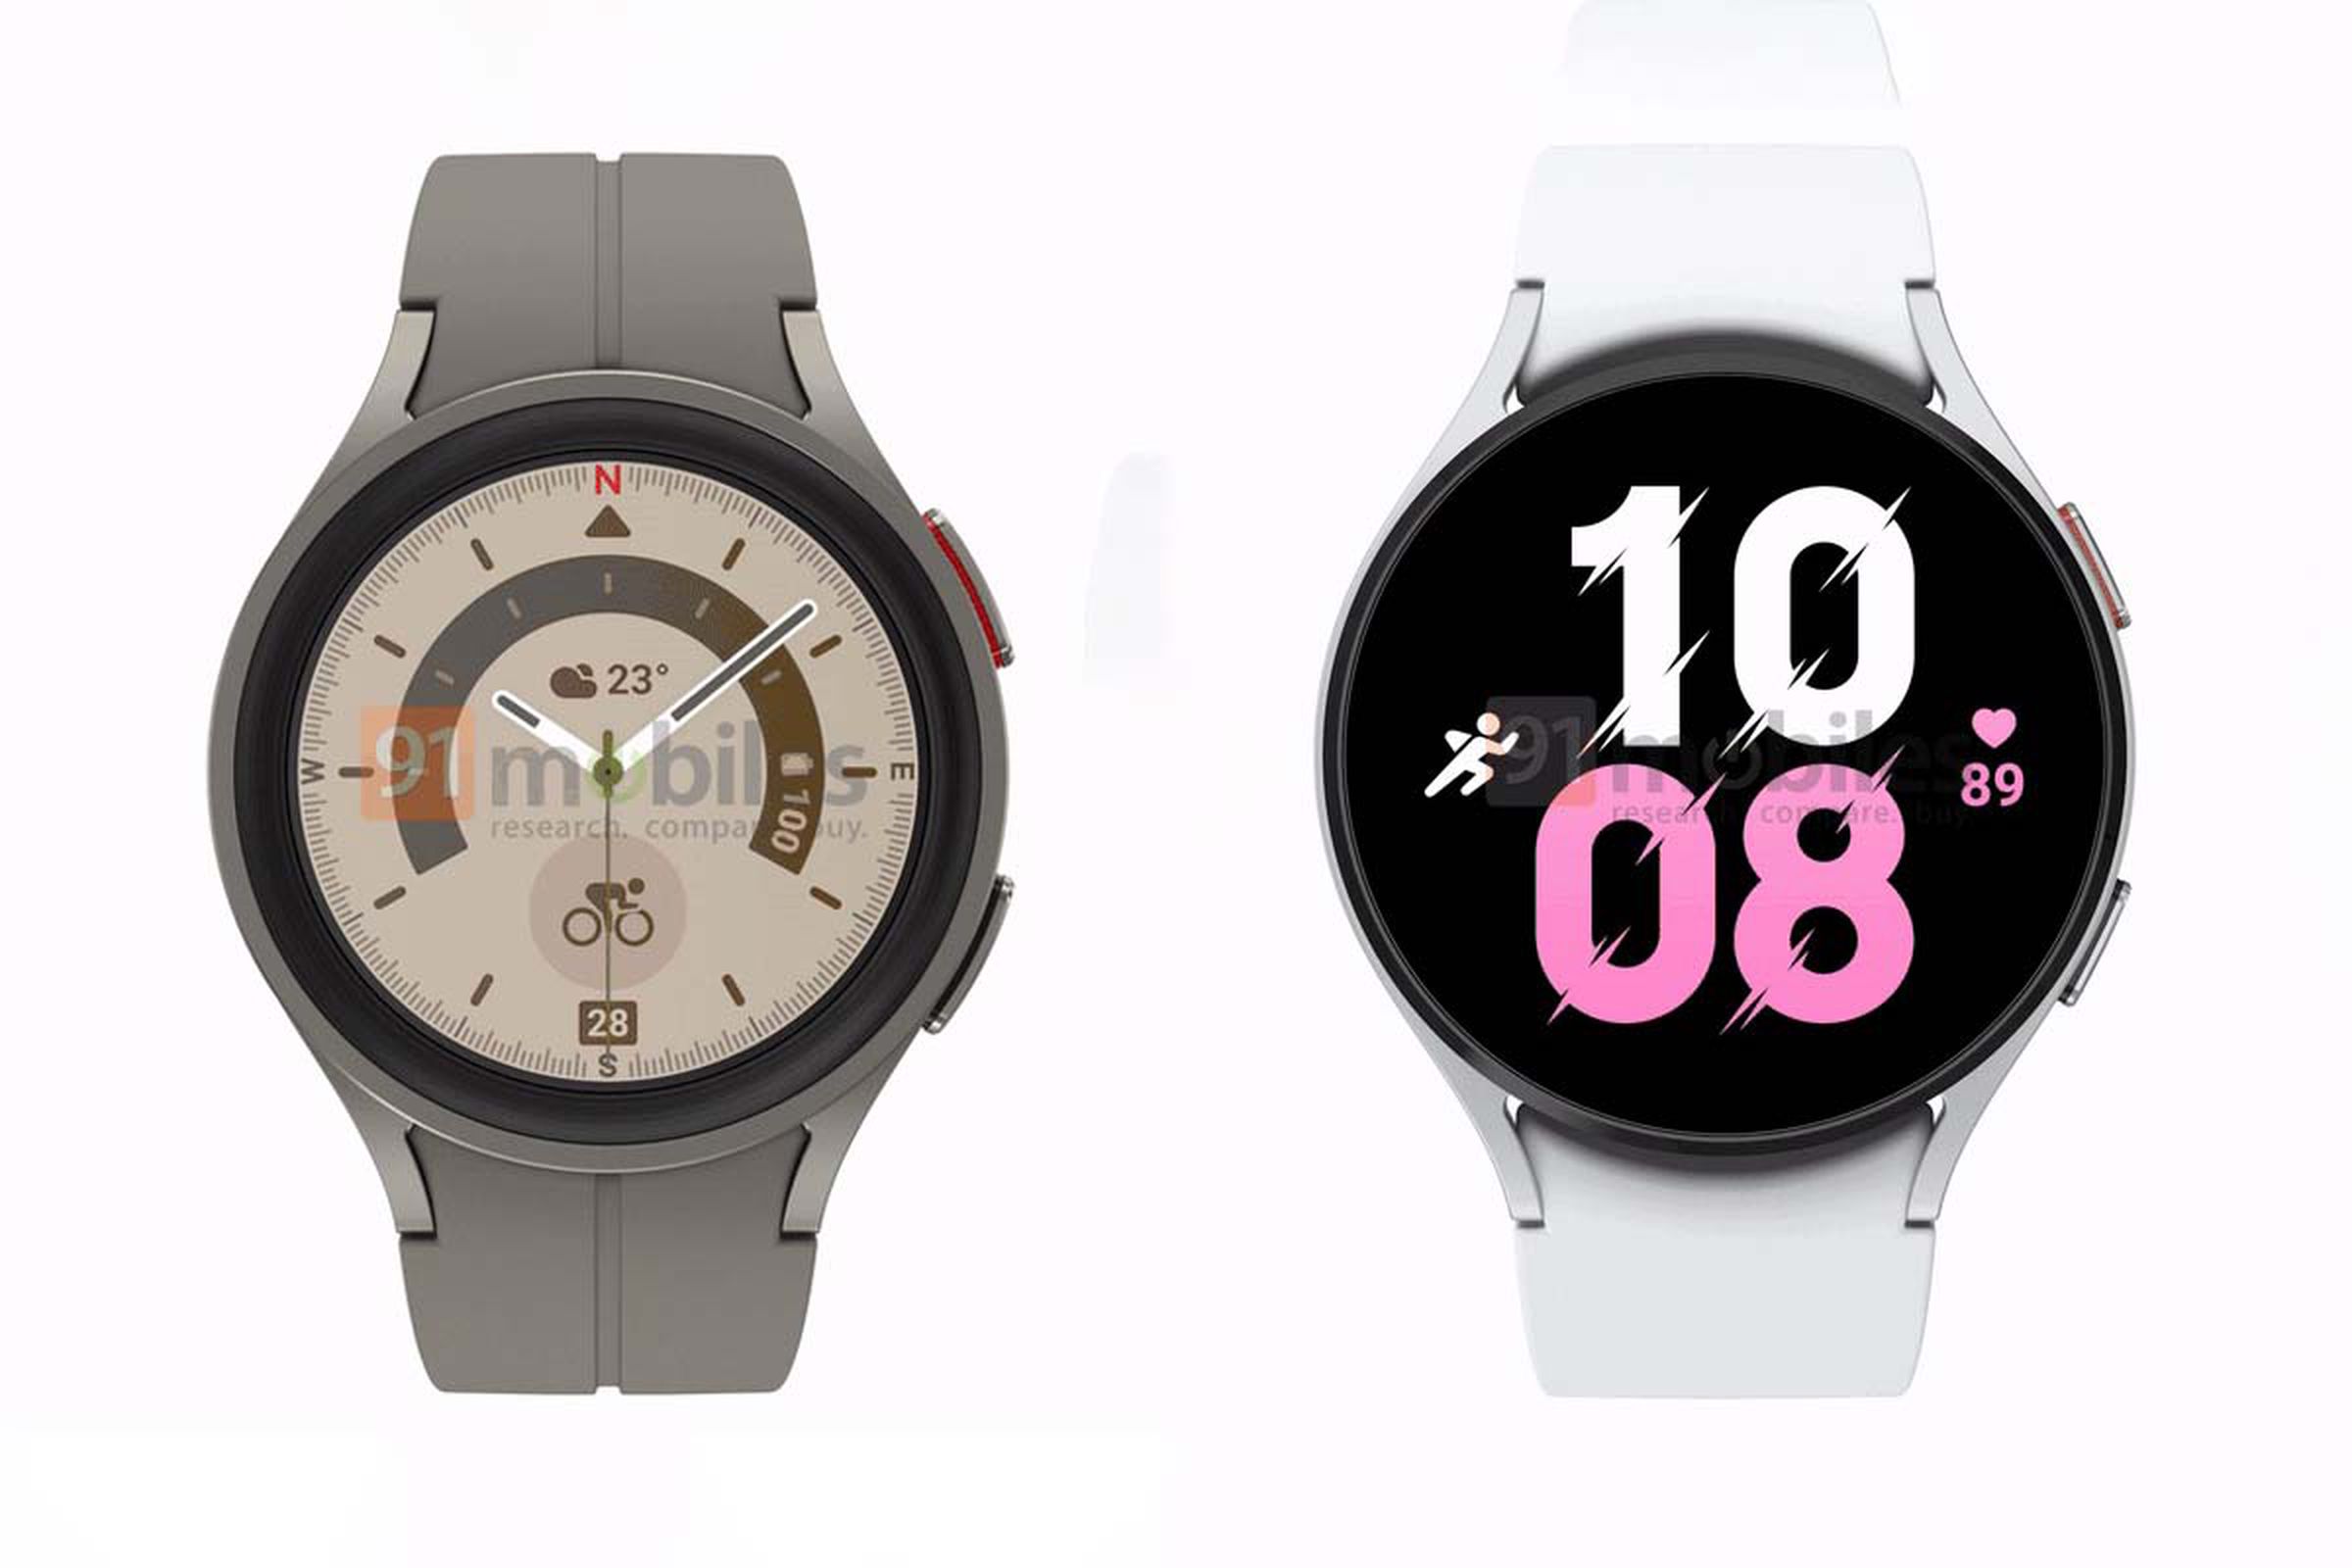 The Galaxy Watch 5 Pro (left) and Watch 5 (right).